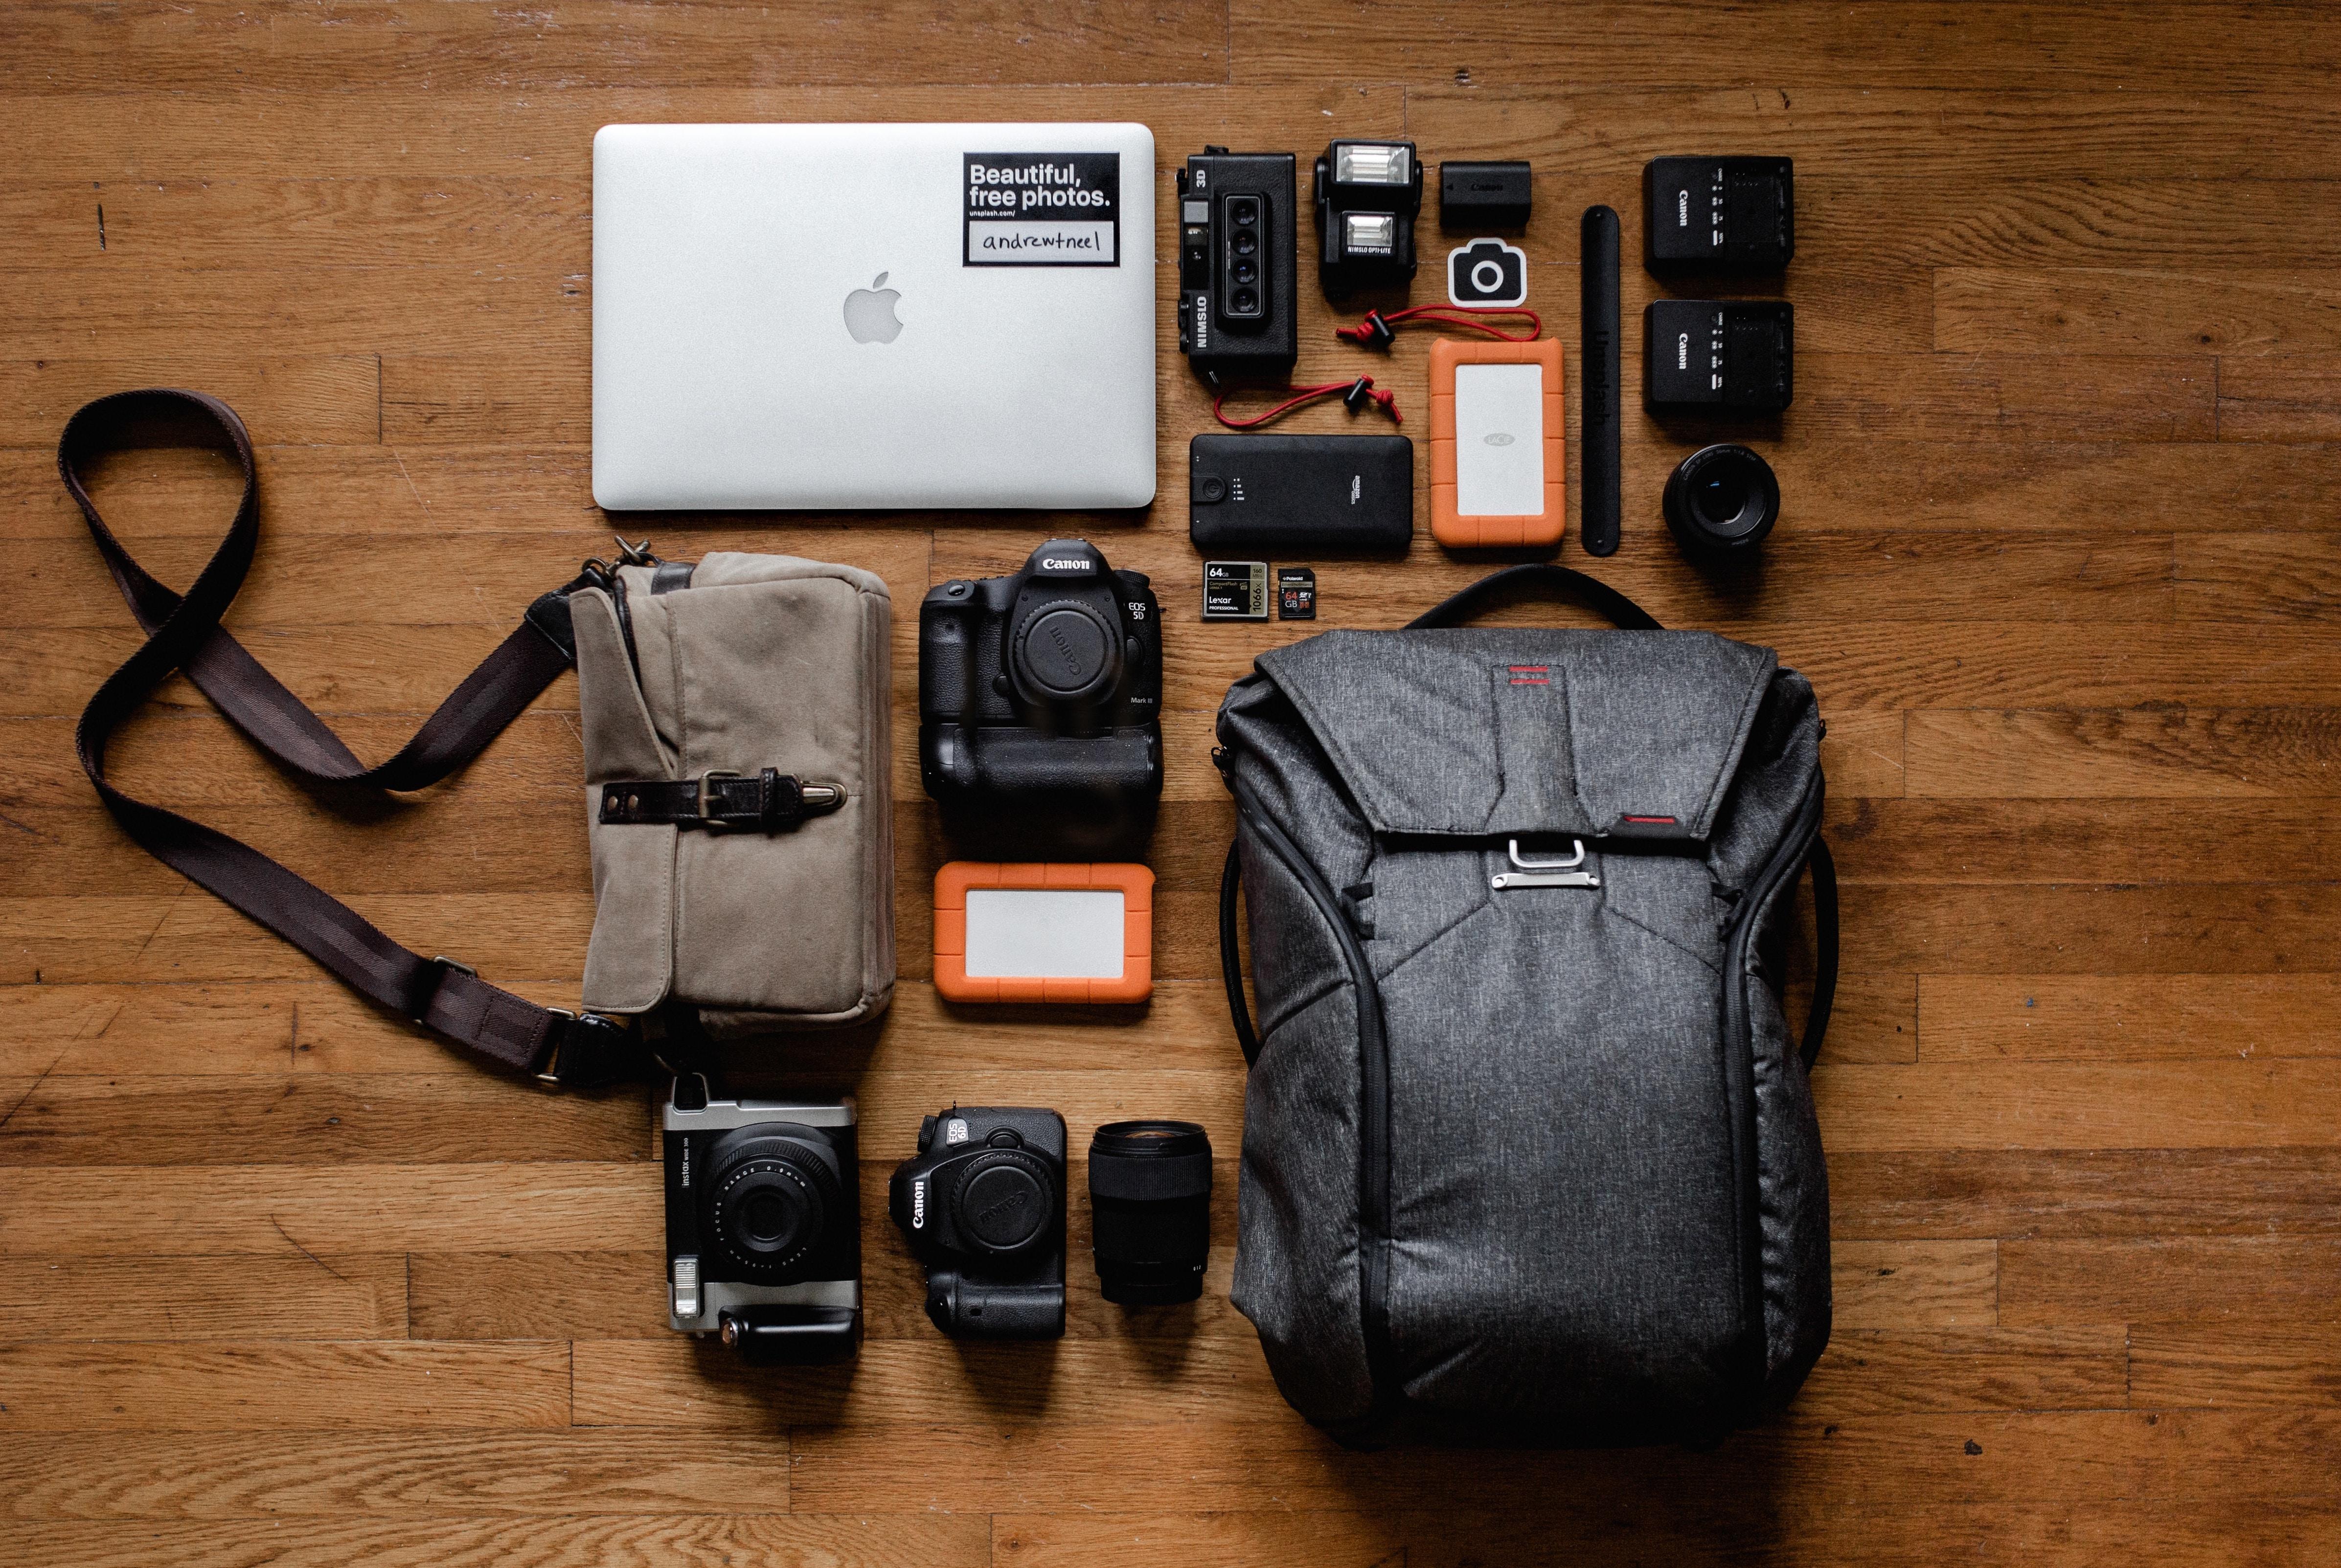 Do You Place Your Camera in Your Backpack With or Without a Lens